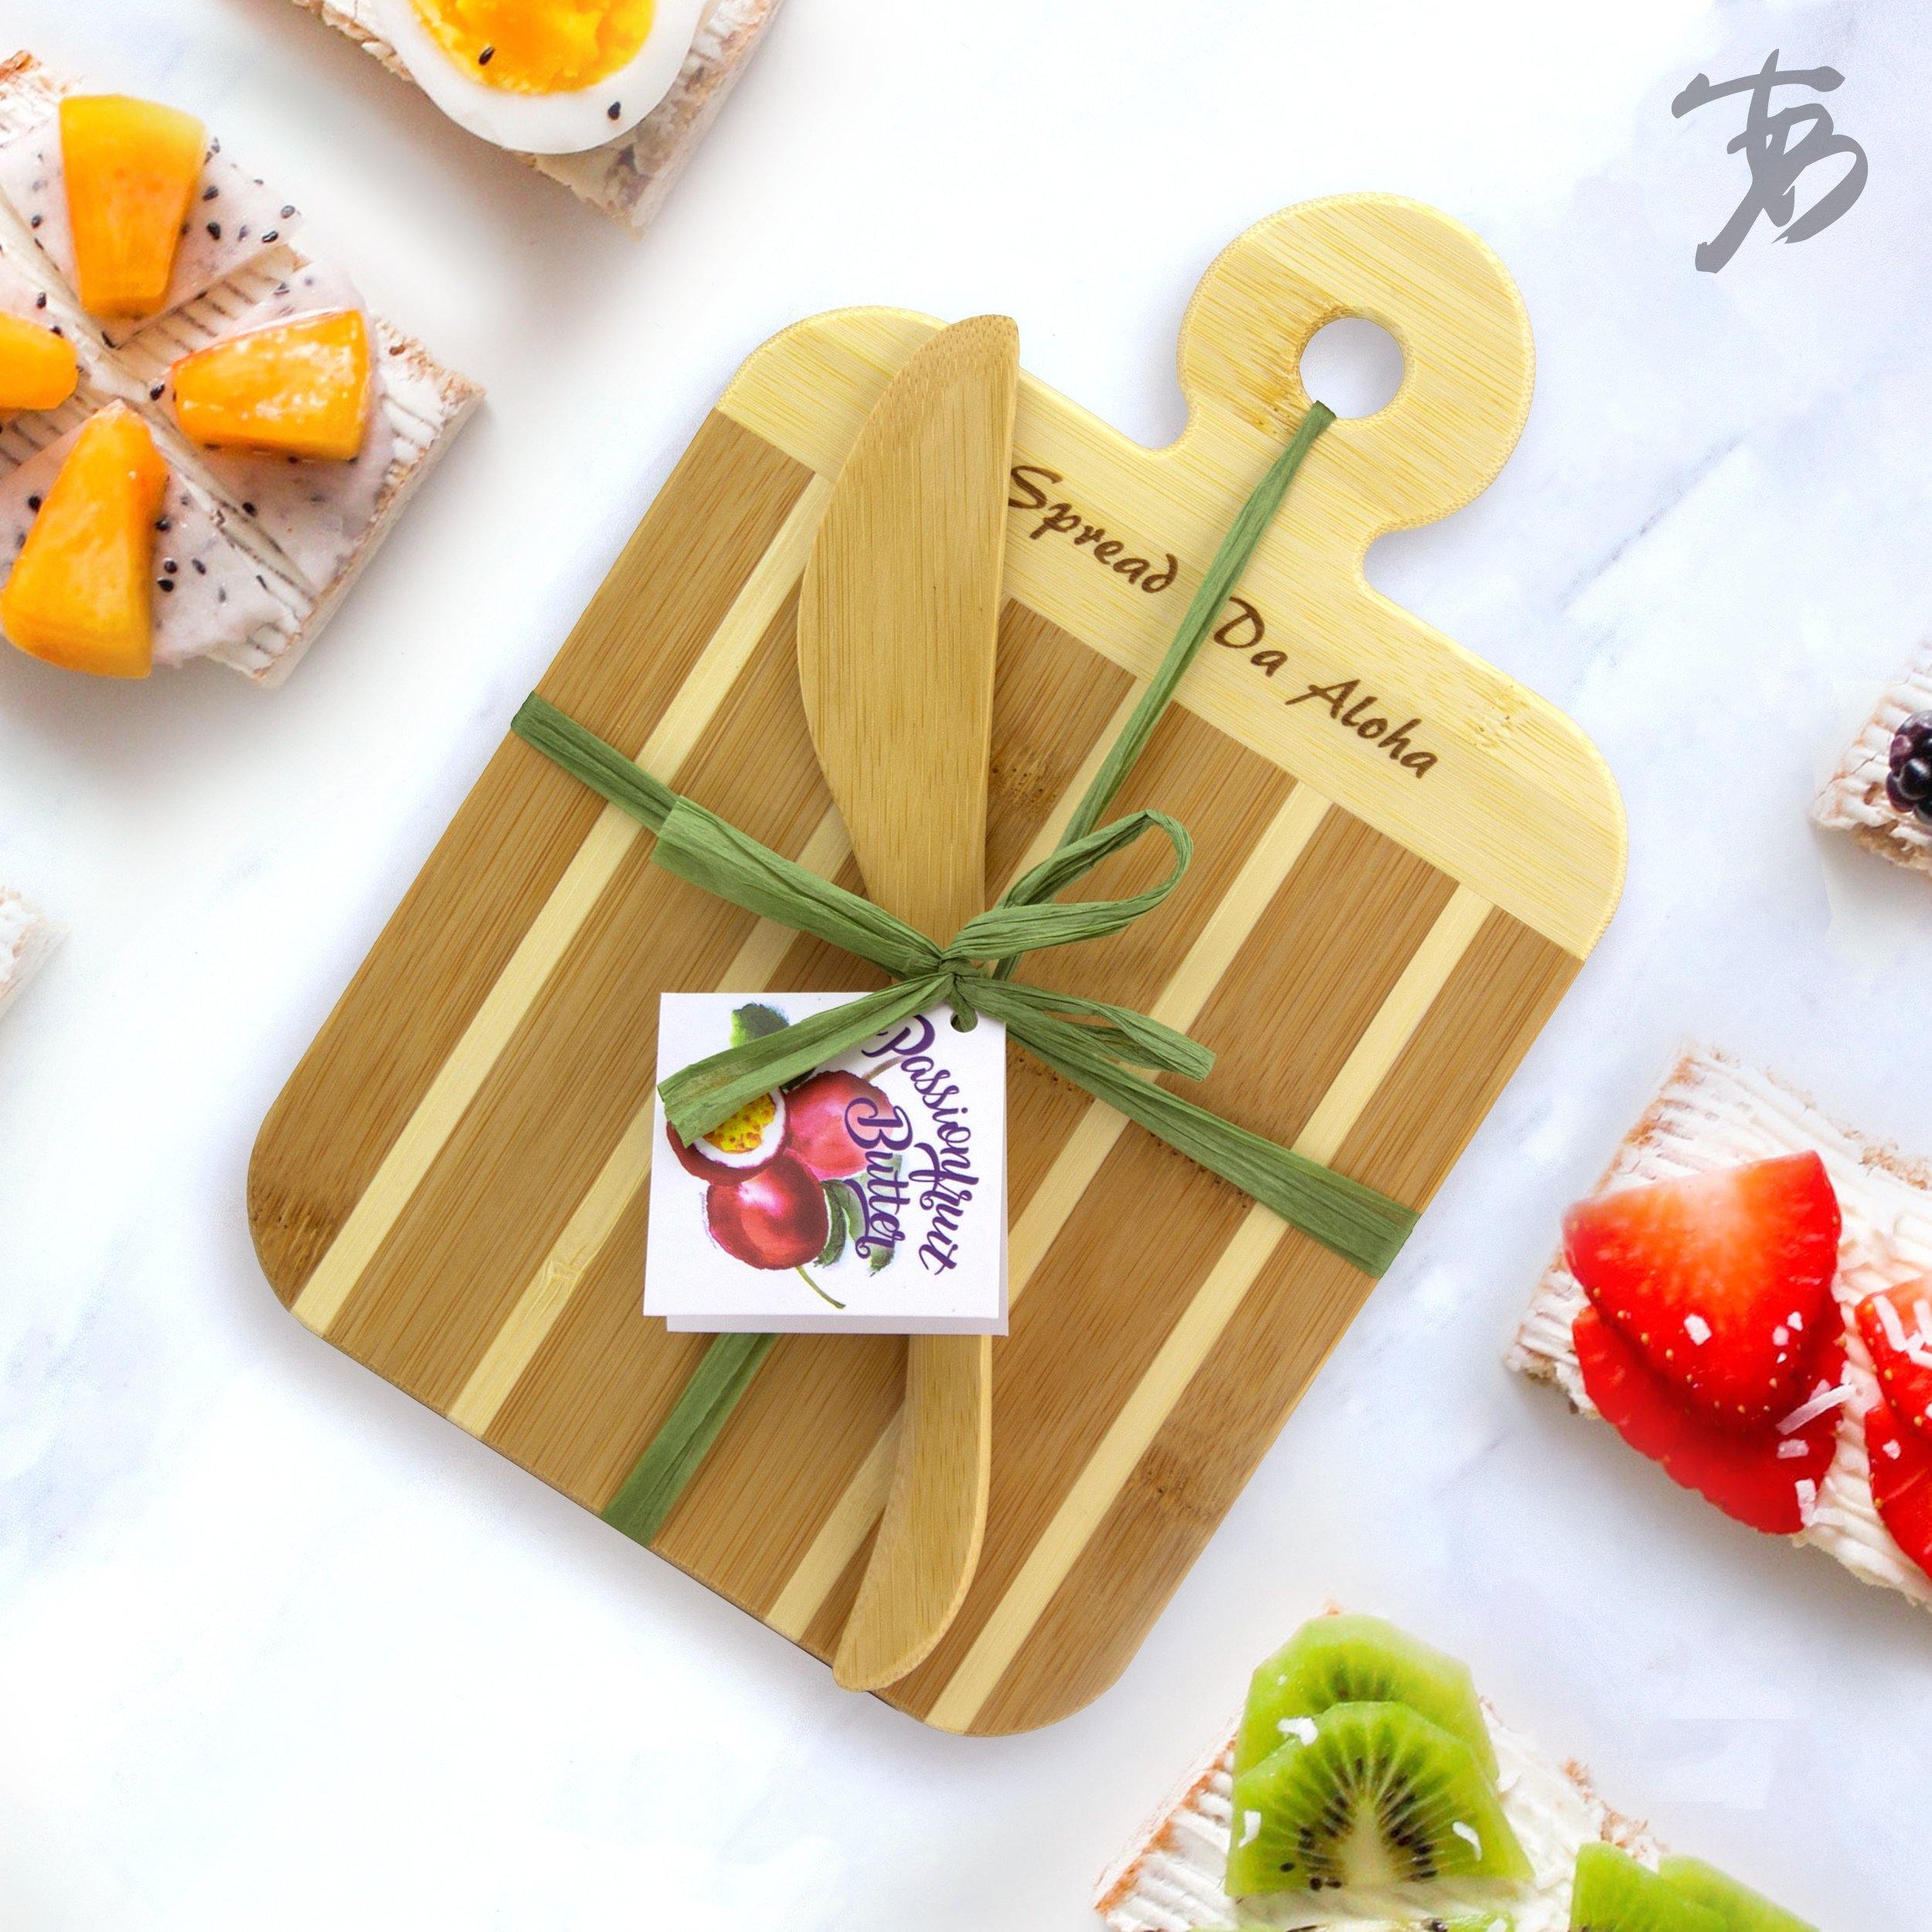 https://totallybamboo.com/cdn/shop/products/spread-da-aloha-serving-and-cutting-board-with-spreader-knife-gift-set-totally-bamboo-333269.jpg?v=1627886723